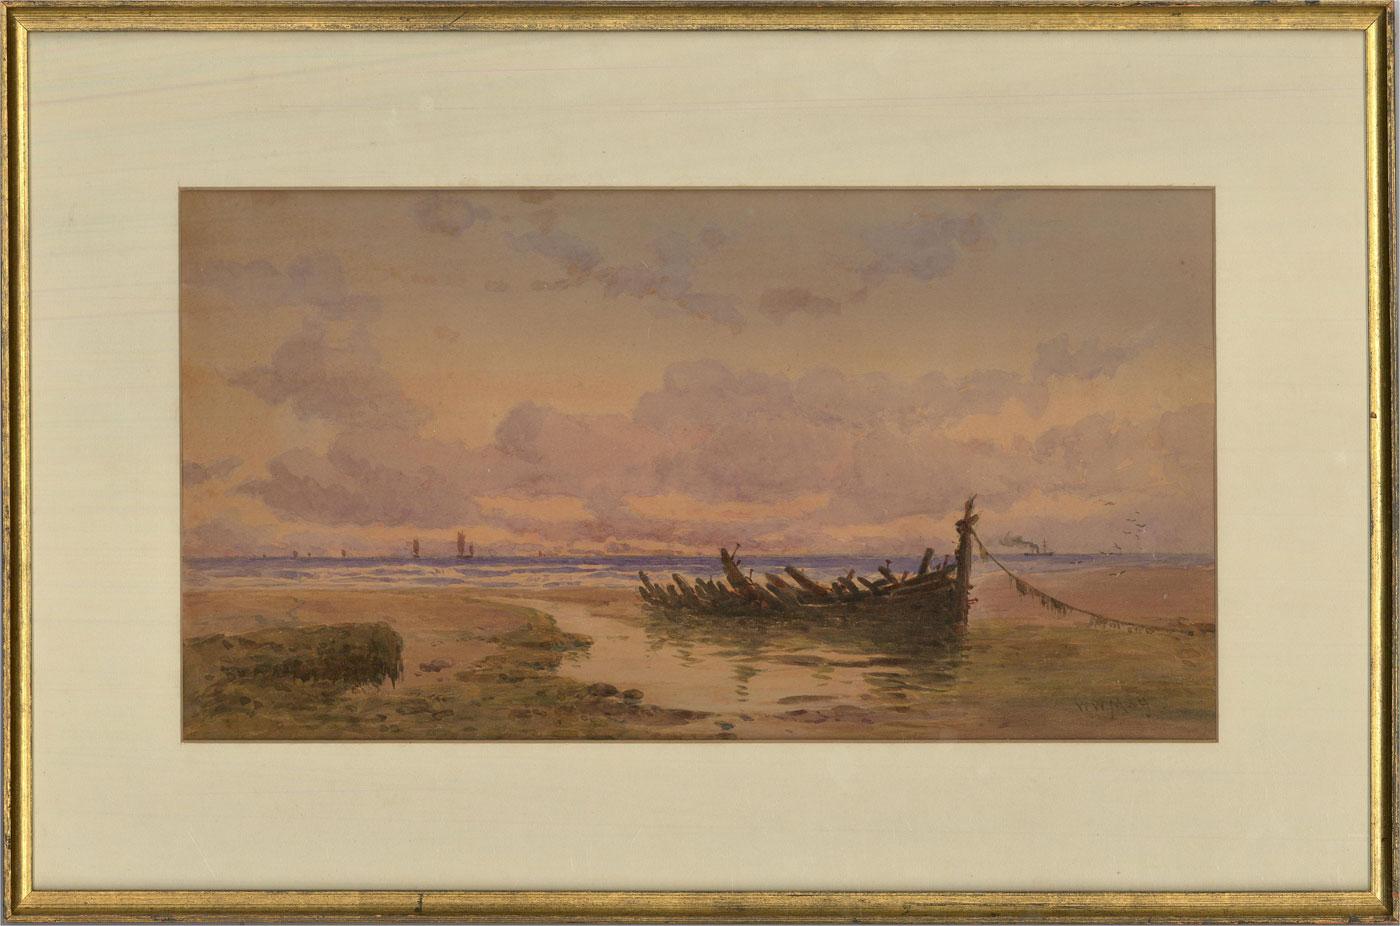 A striking late 19th Century beach scene showing the silhouette of a wrecked boat on the wet sands at low tide. The artist has signed to the lower right and the painting has been presented in a simple gilt frame with card mount. On wove.
